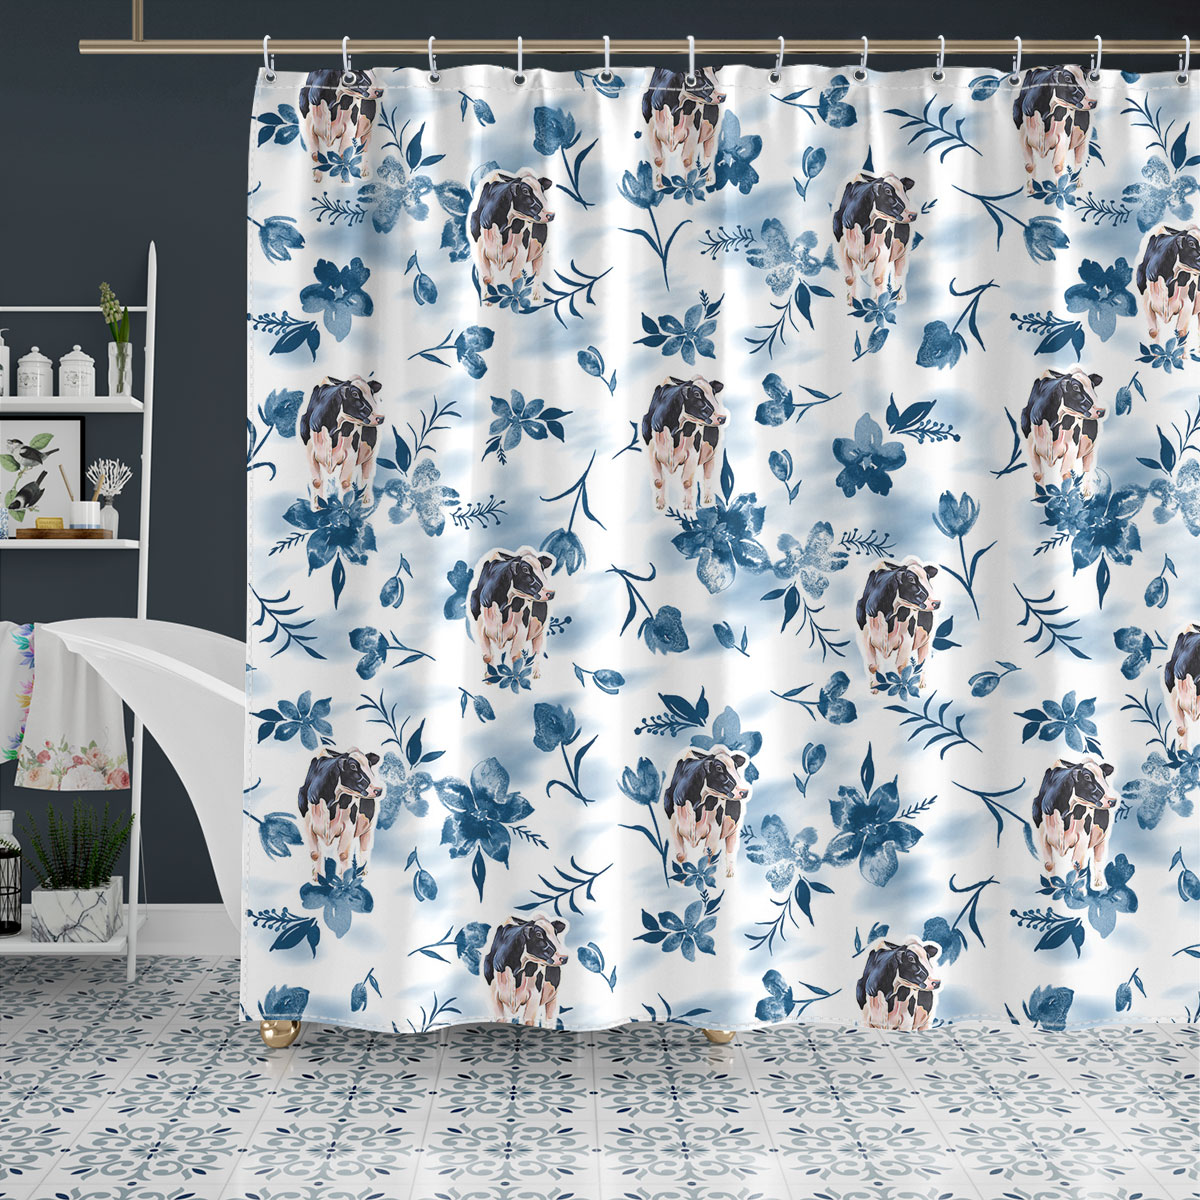 Holstein Watercolor Flowers and Leaves Tie Dye Pattern Shower Curtain